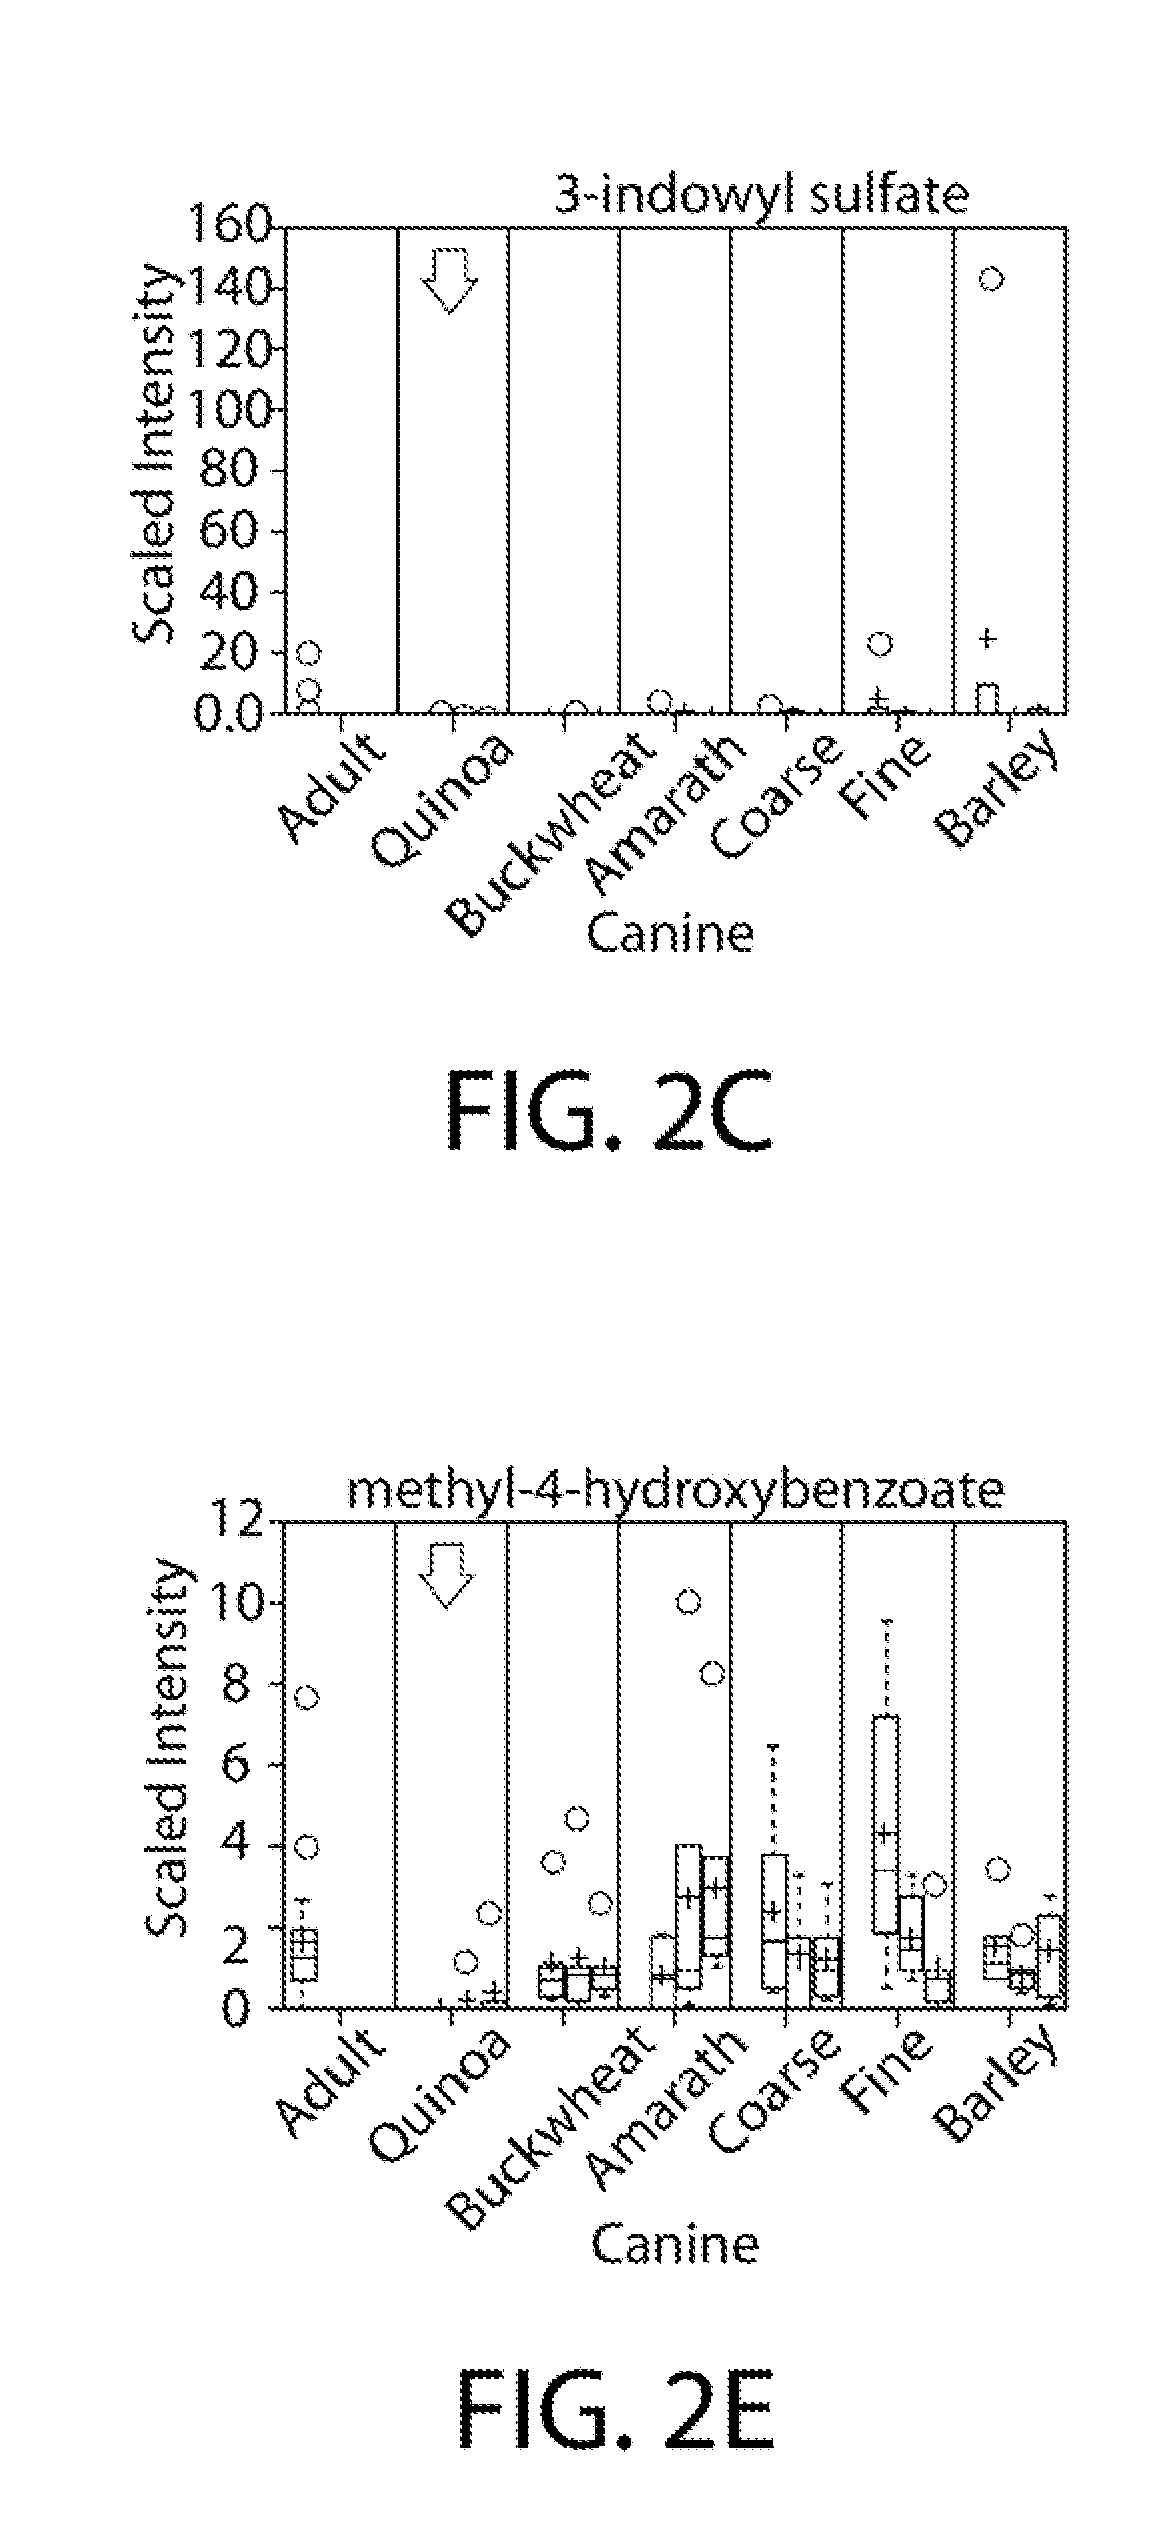 Food Composition and Method of Use